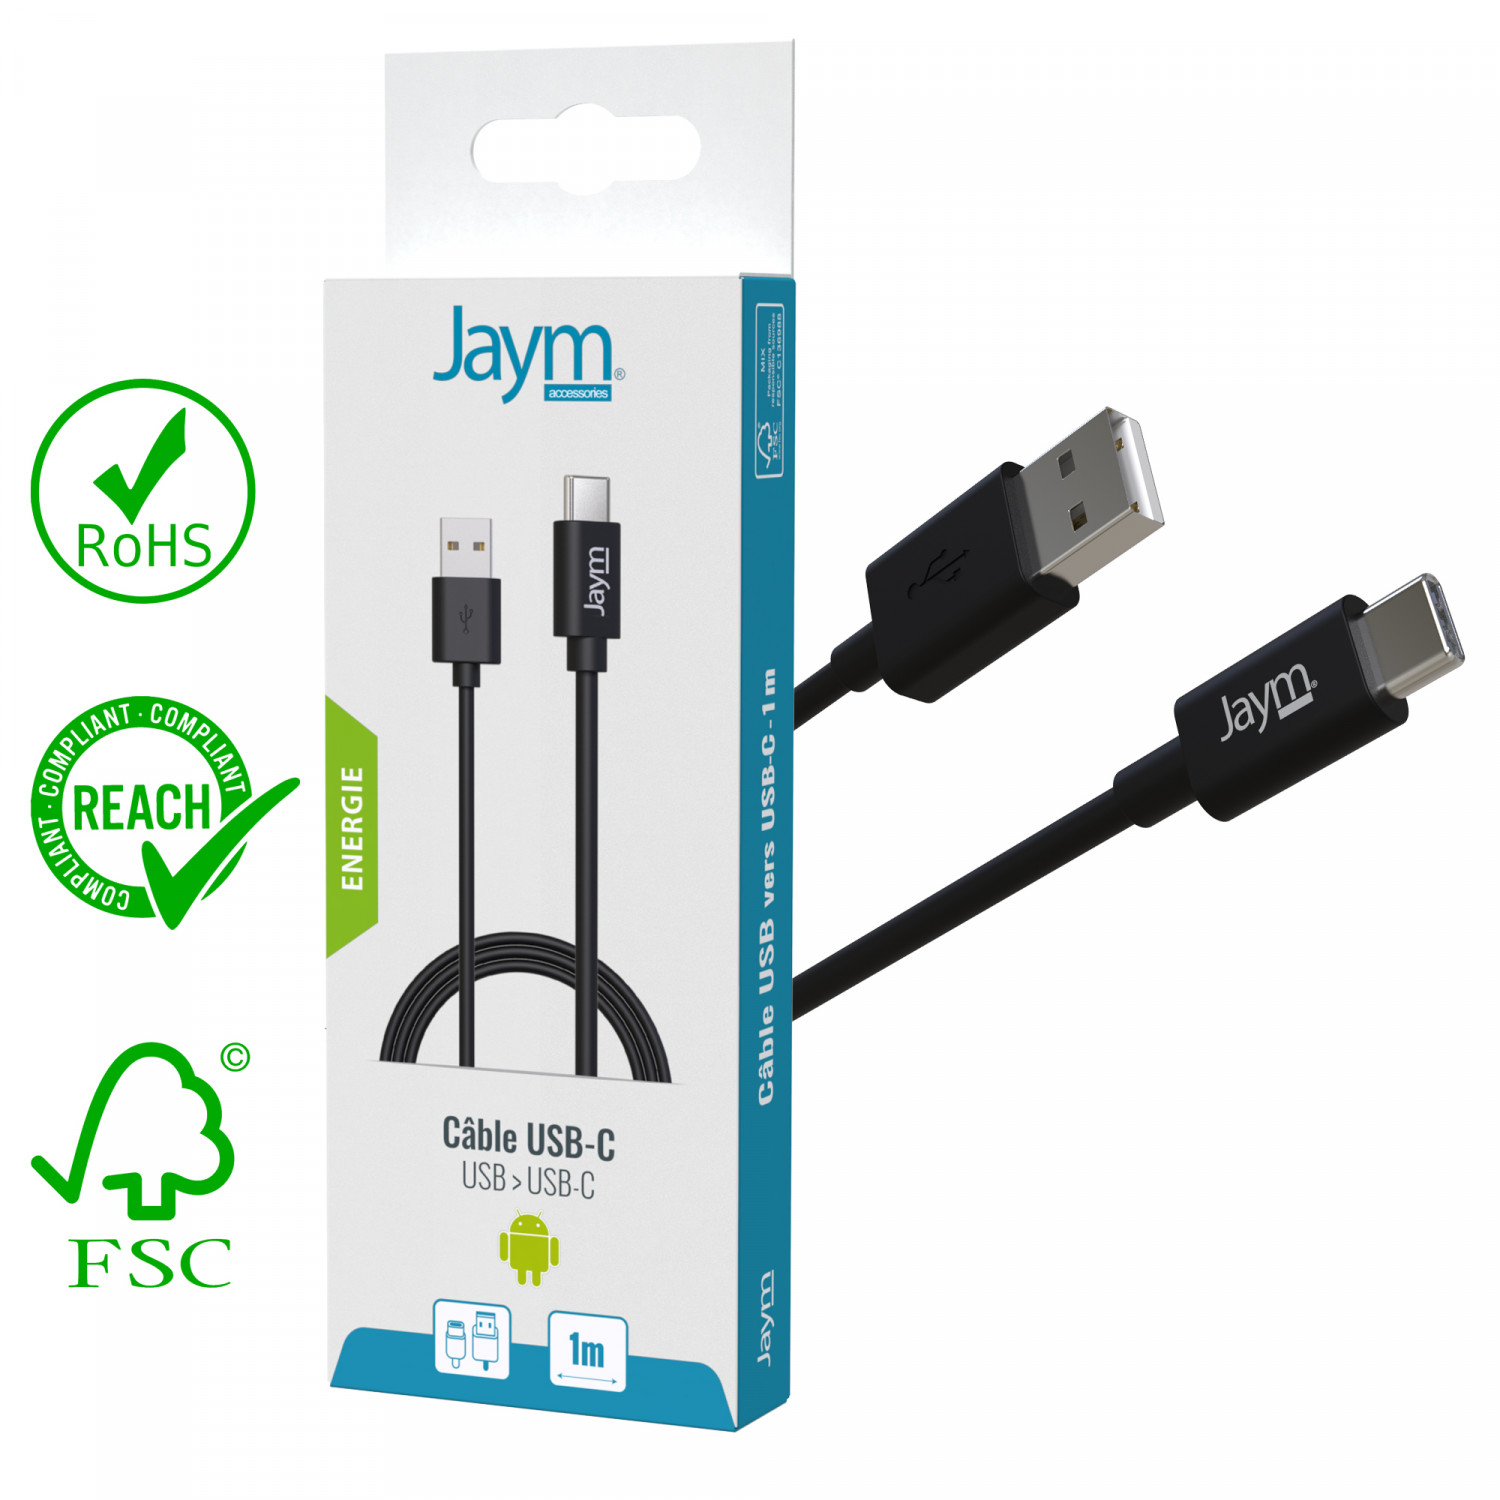 Enkay Hat Prince 1m 66W 6A Super Fast Charge Data Cable USB to